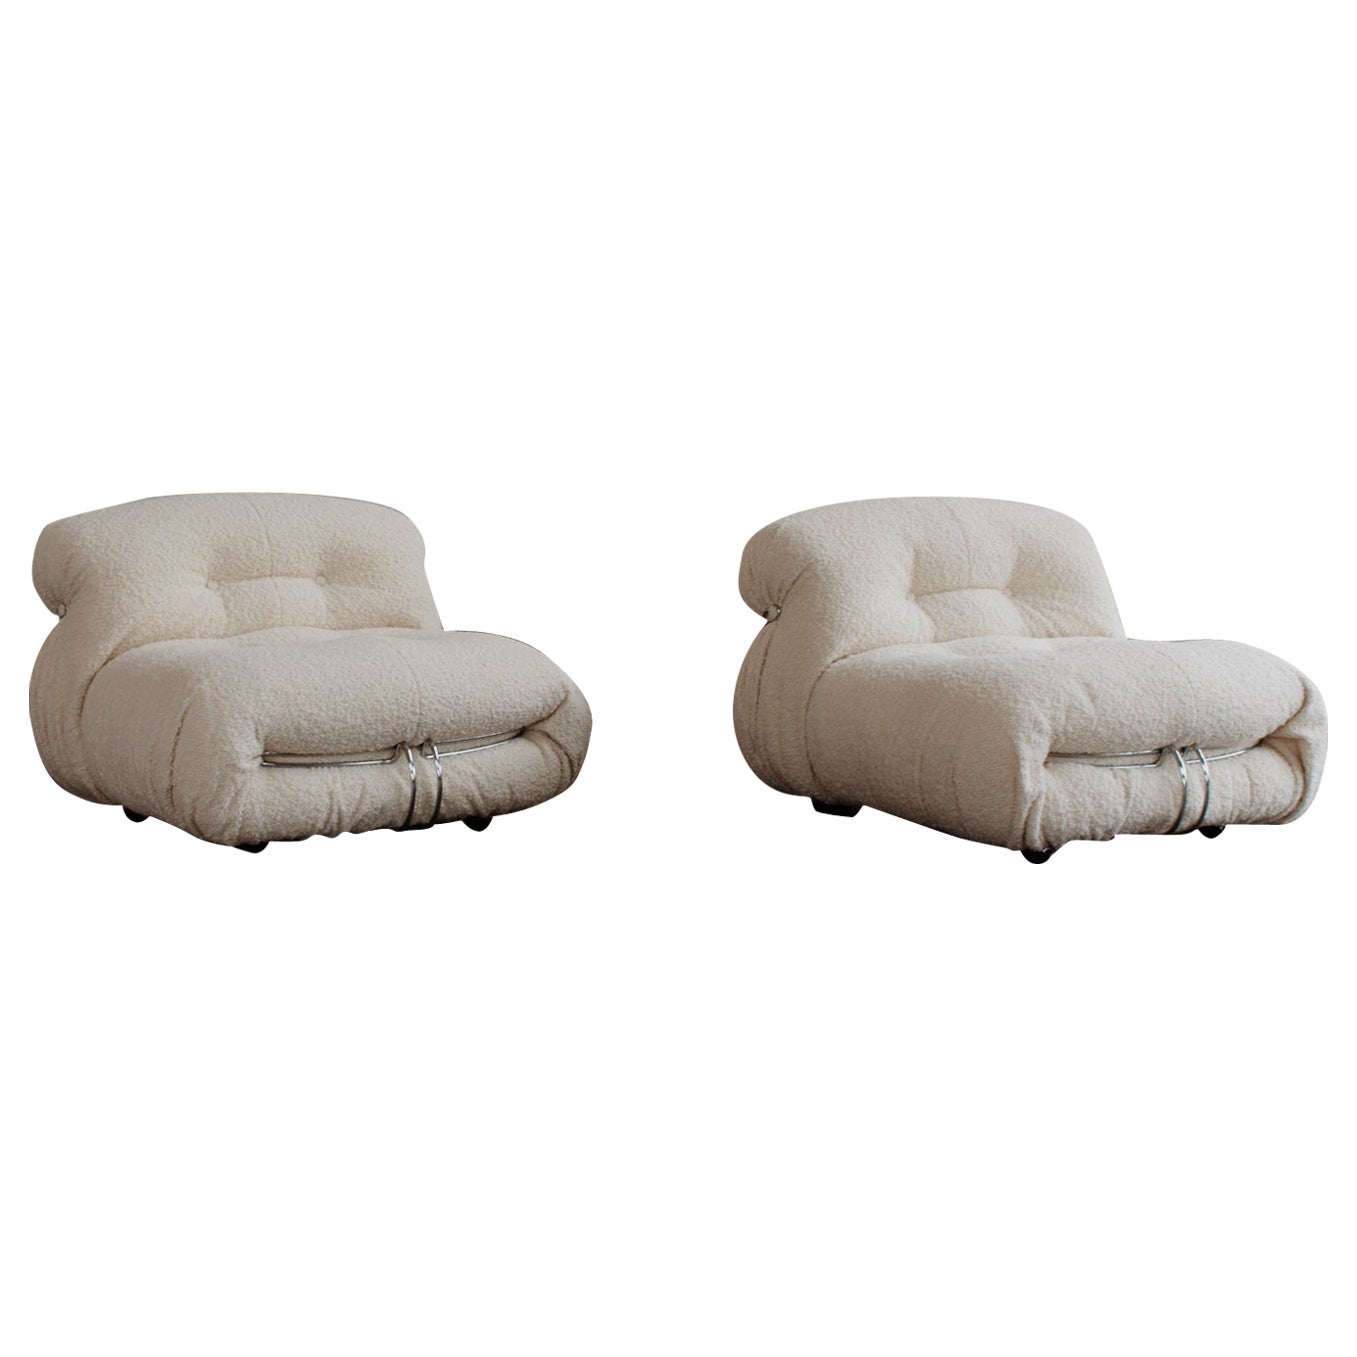 Afra & Tobia Scarpa “Soriana” Chairs for Cassina, Bouclé Wool, 1969, Set of 2